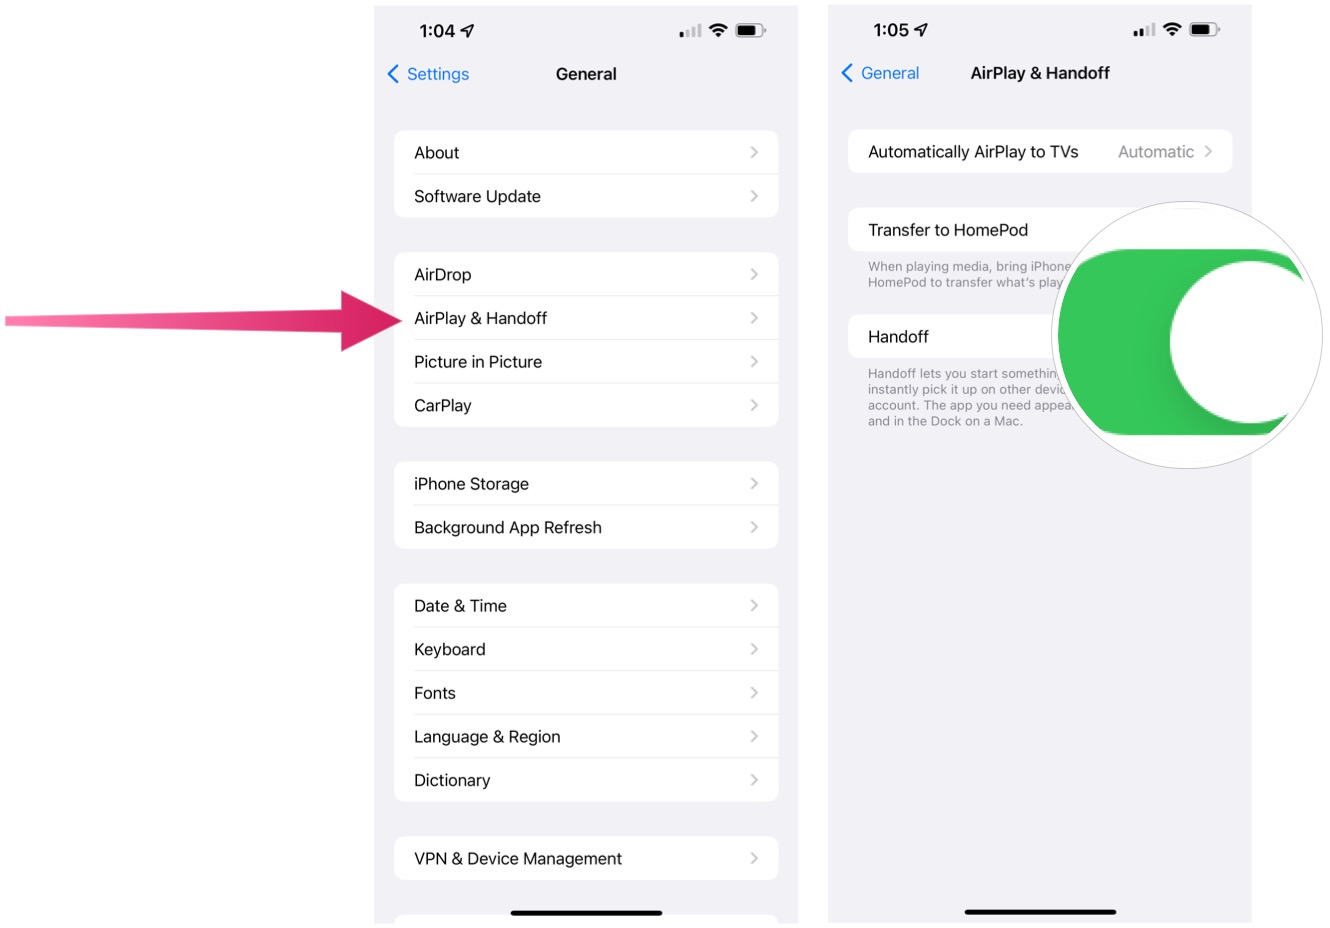 To enable or disable Handoff on iPhone and iPad, tap AirPlay and Handoff. Toggle on Handoff.